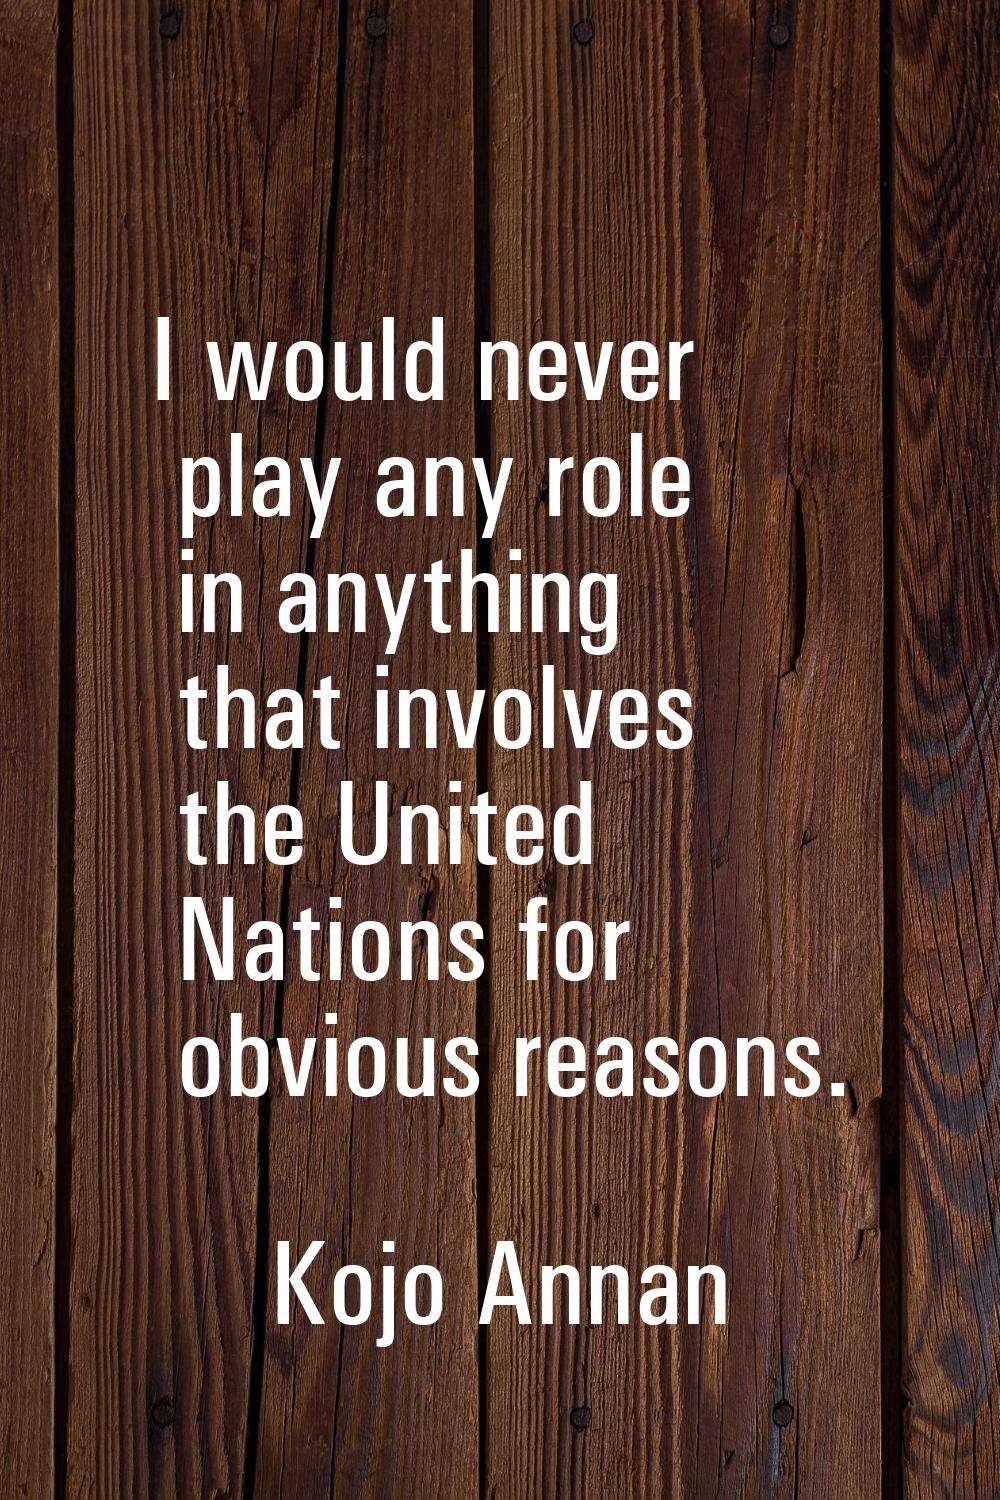 I would never play any role in anything that involves the United Nations for obvious reasons.